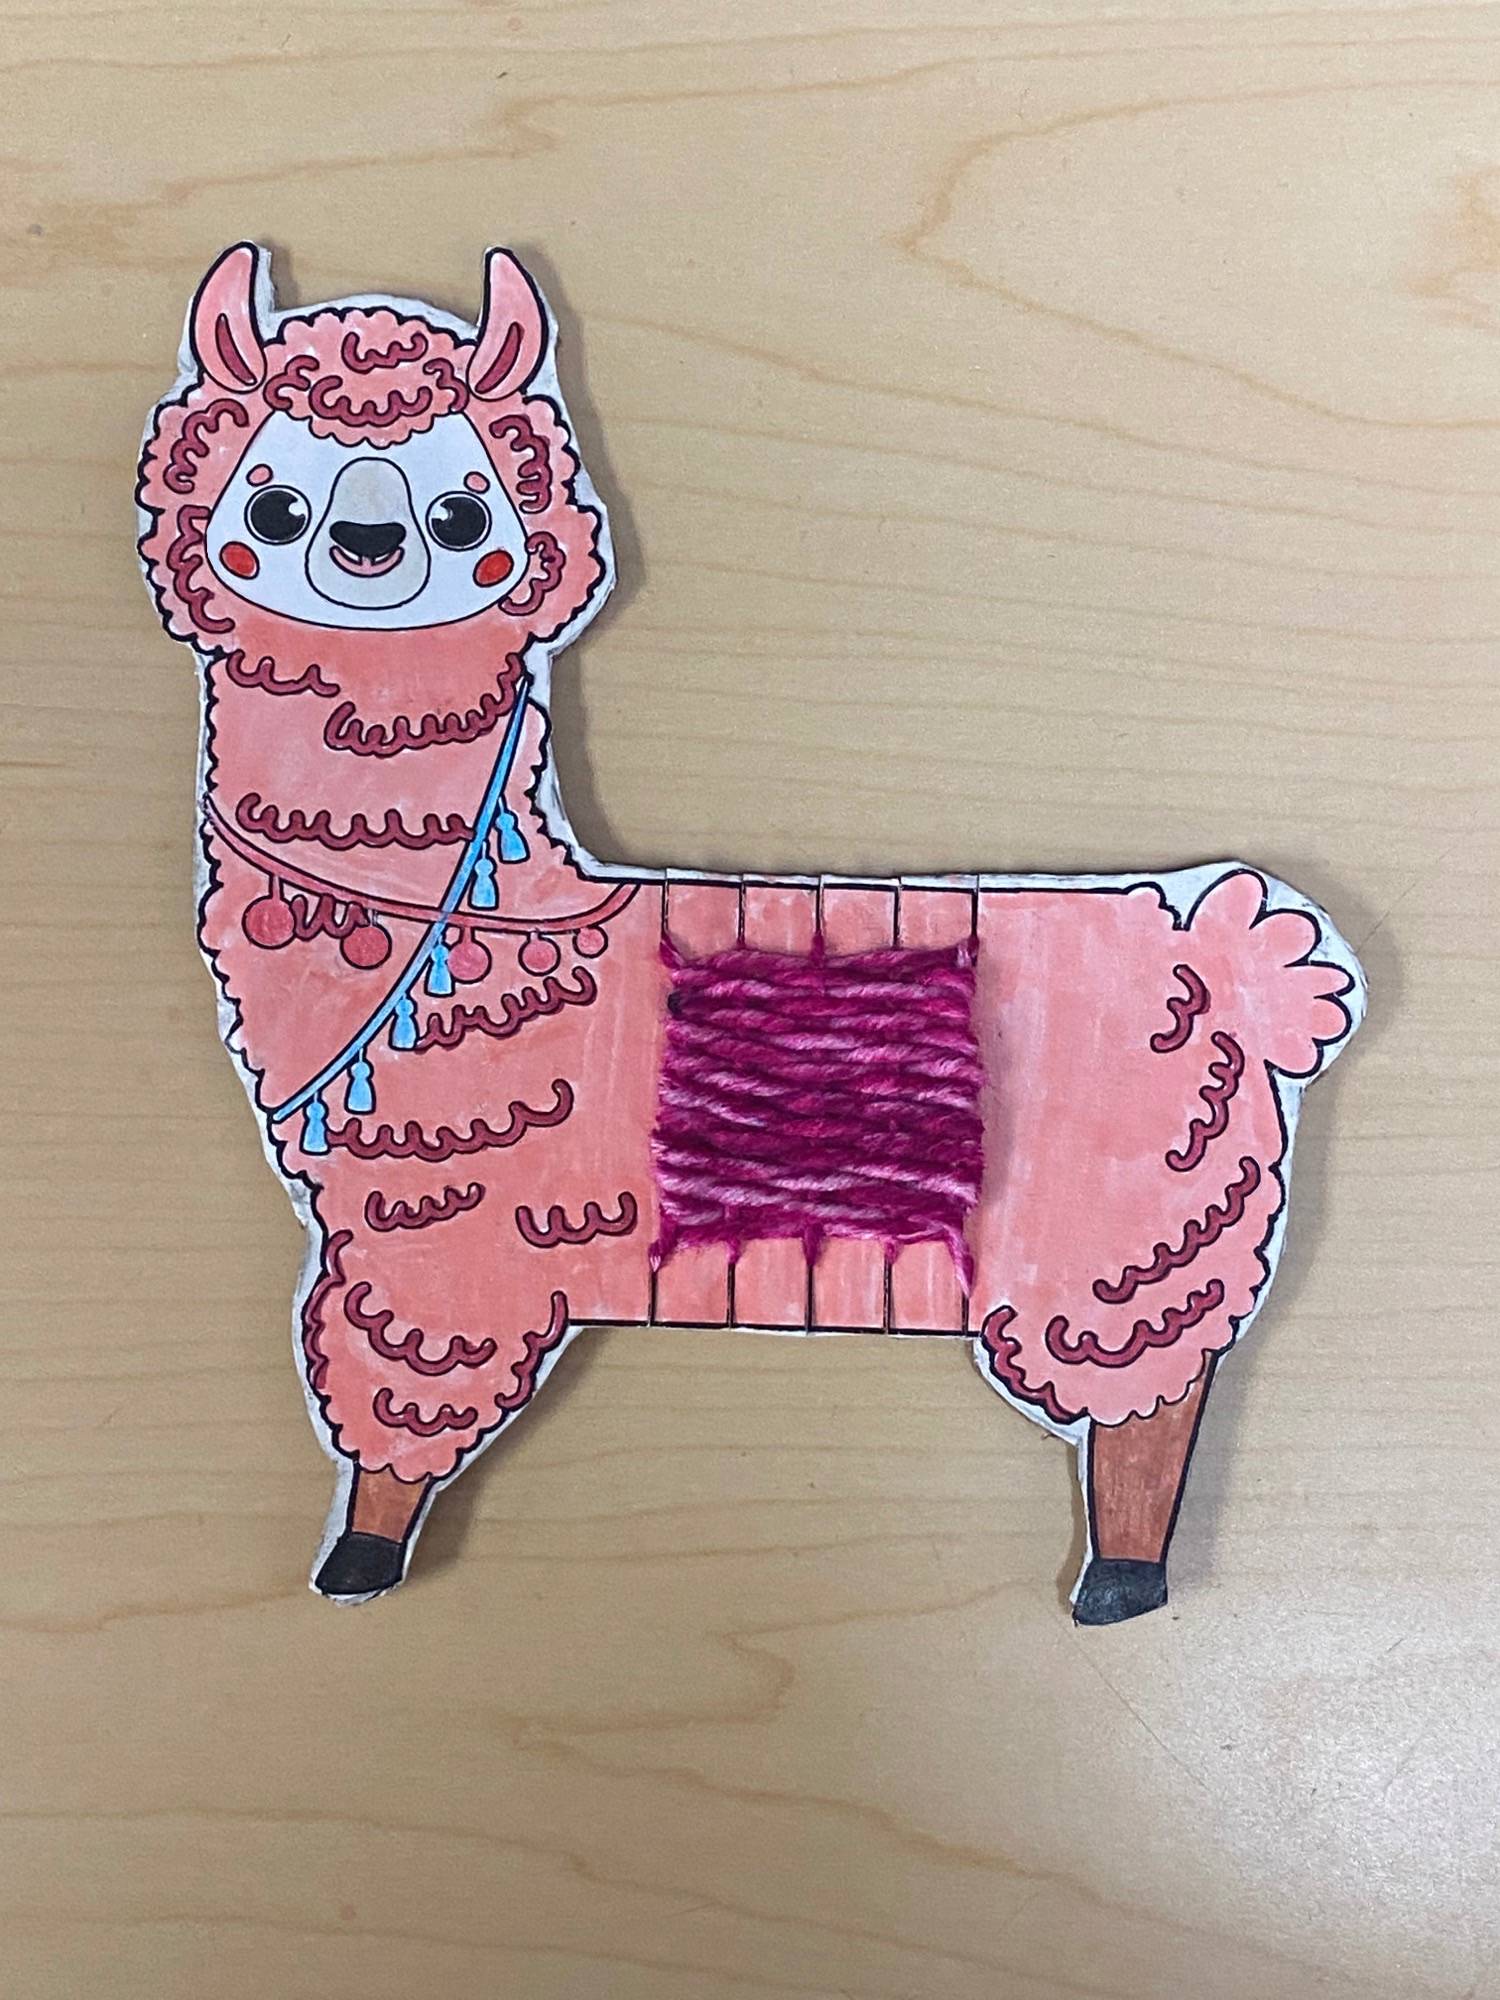 Llama craft with sweater made from yarn